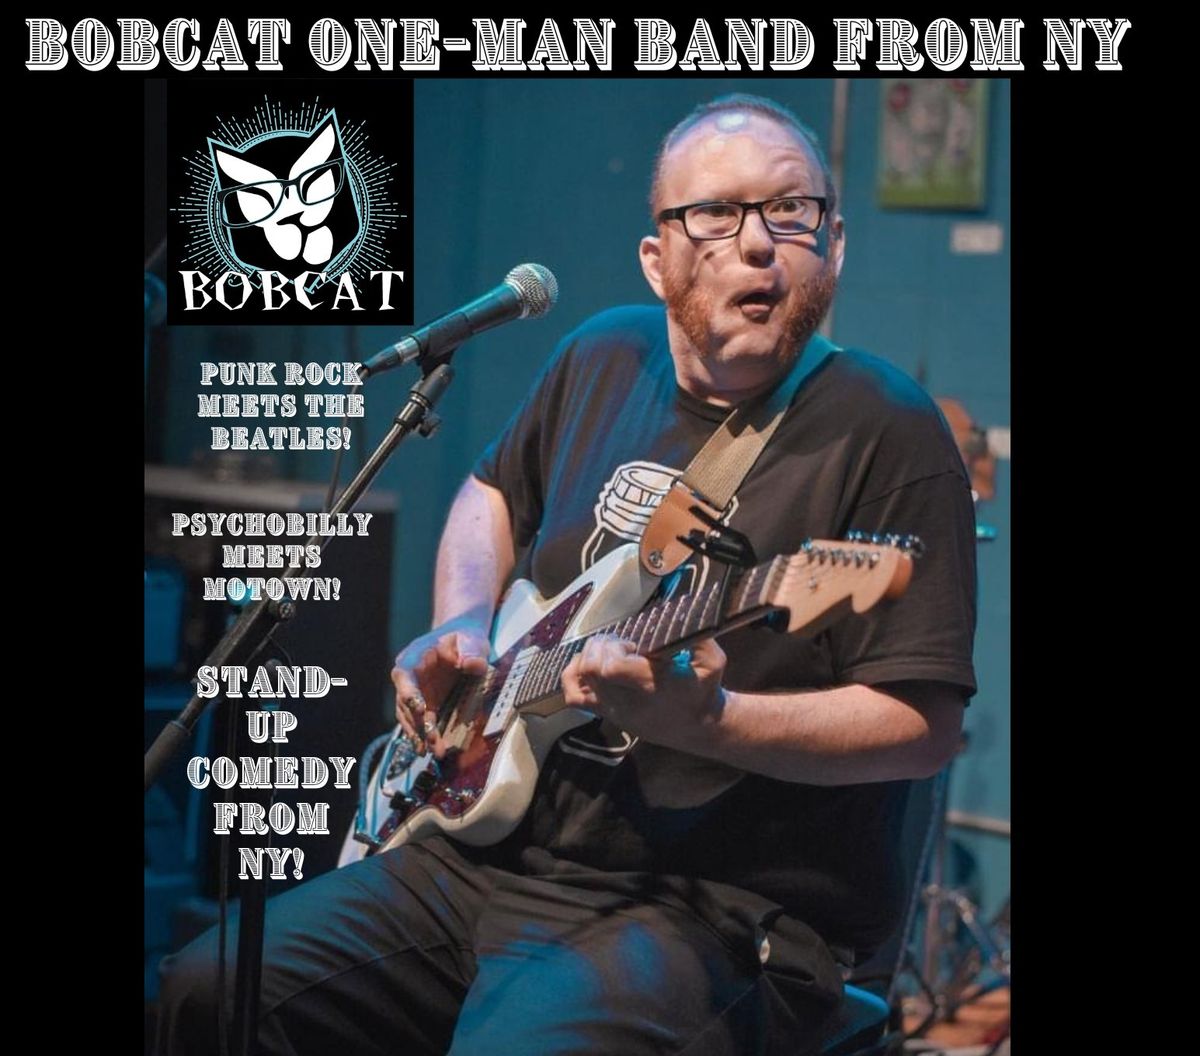 Live Music with Bobcat the One-Man Comedy Band From NY